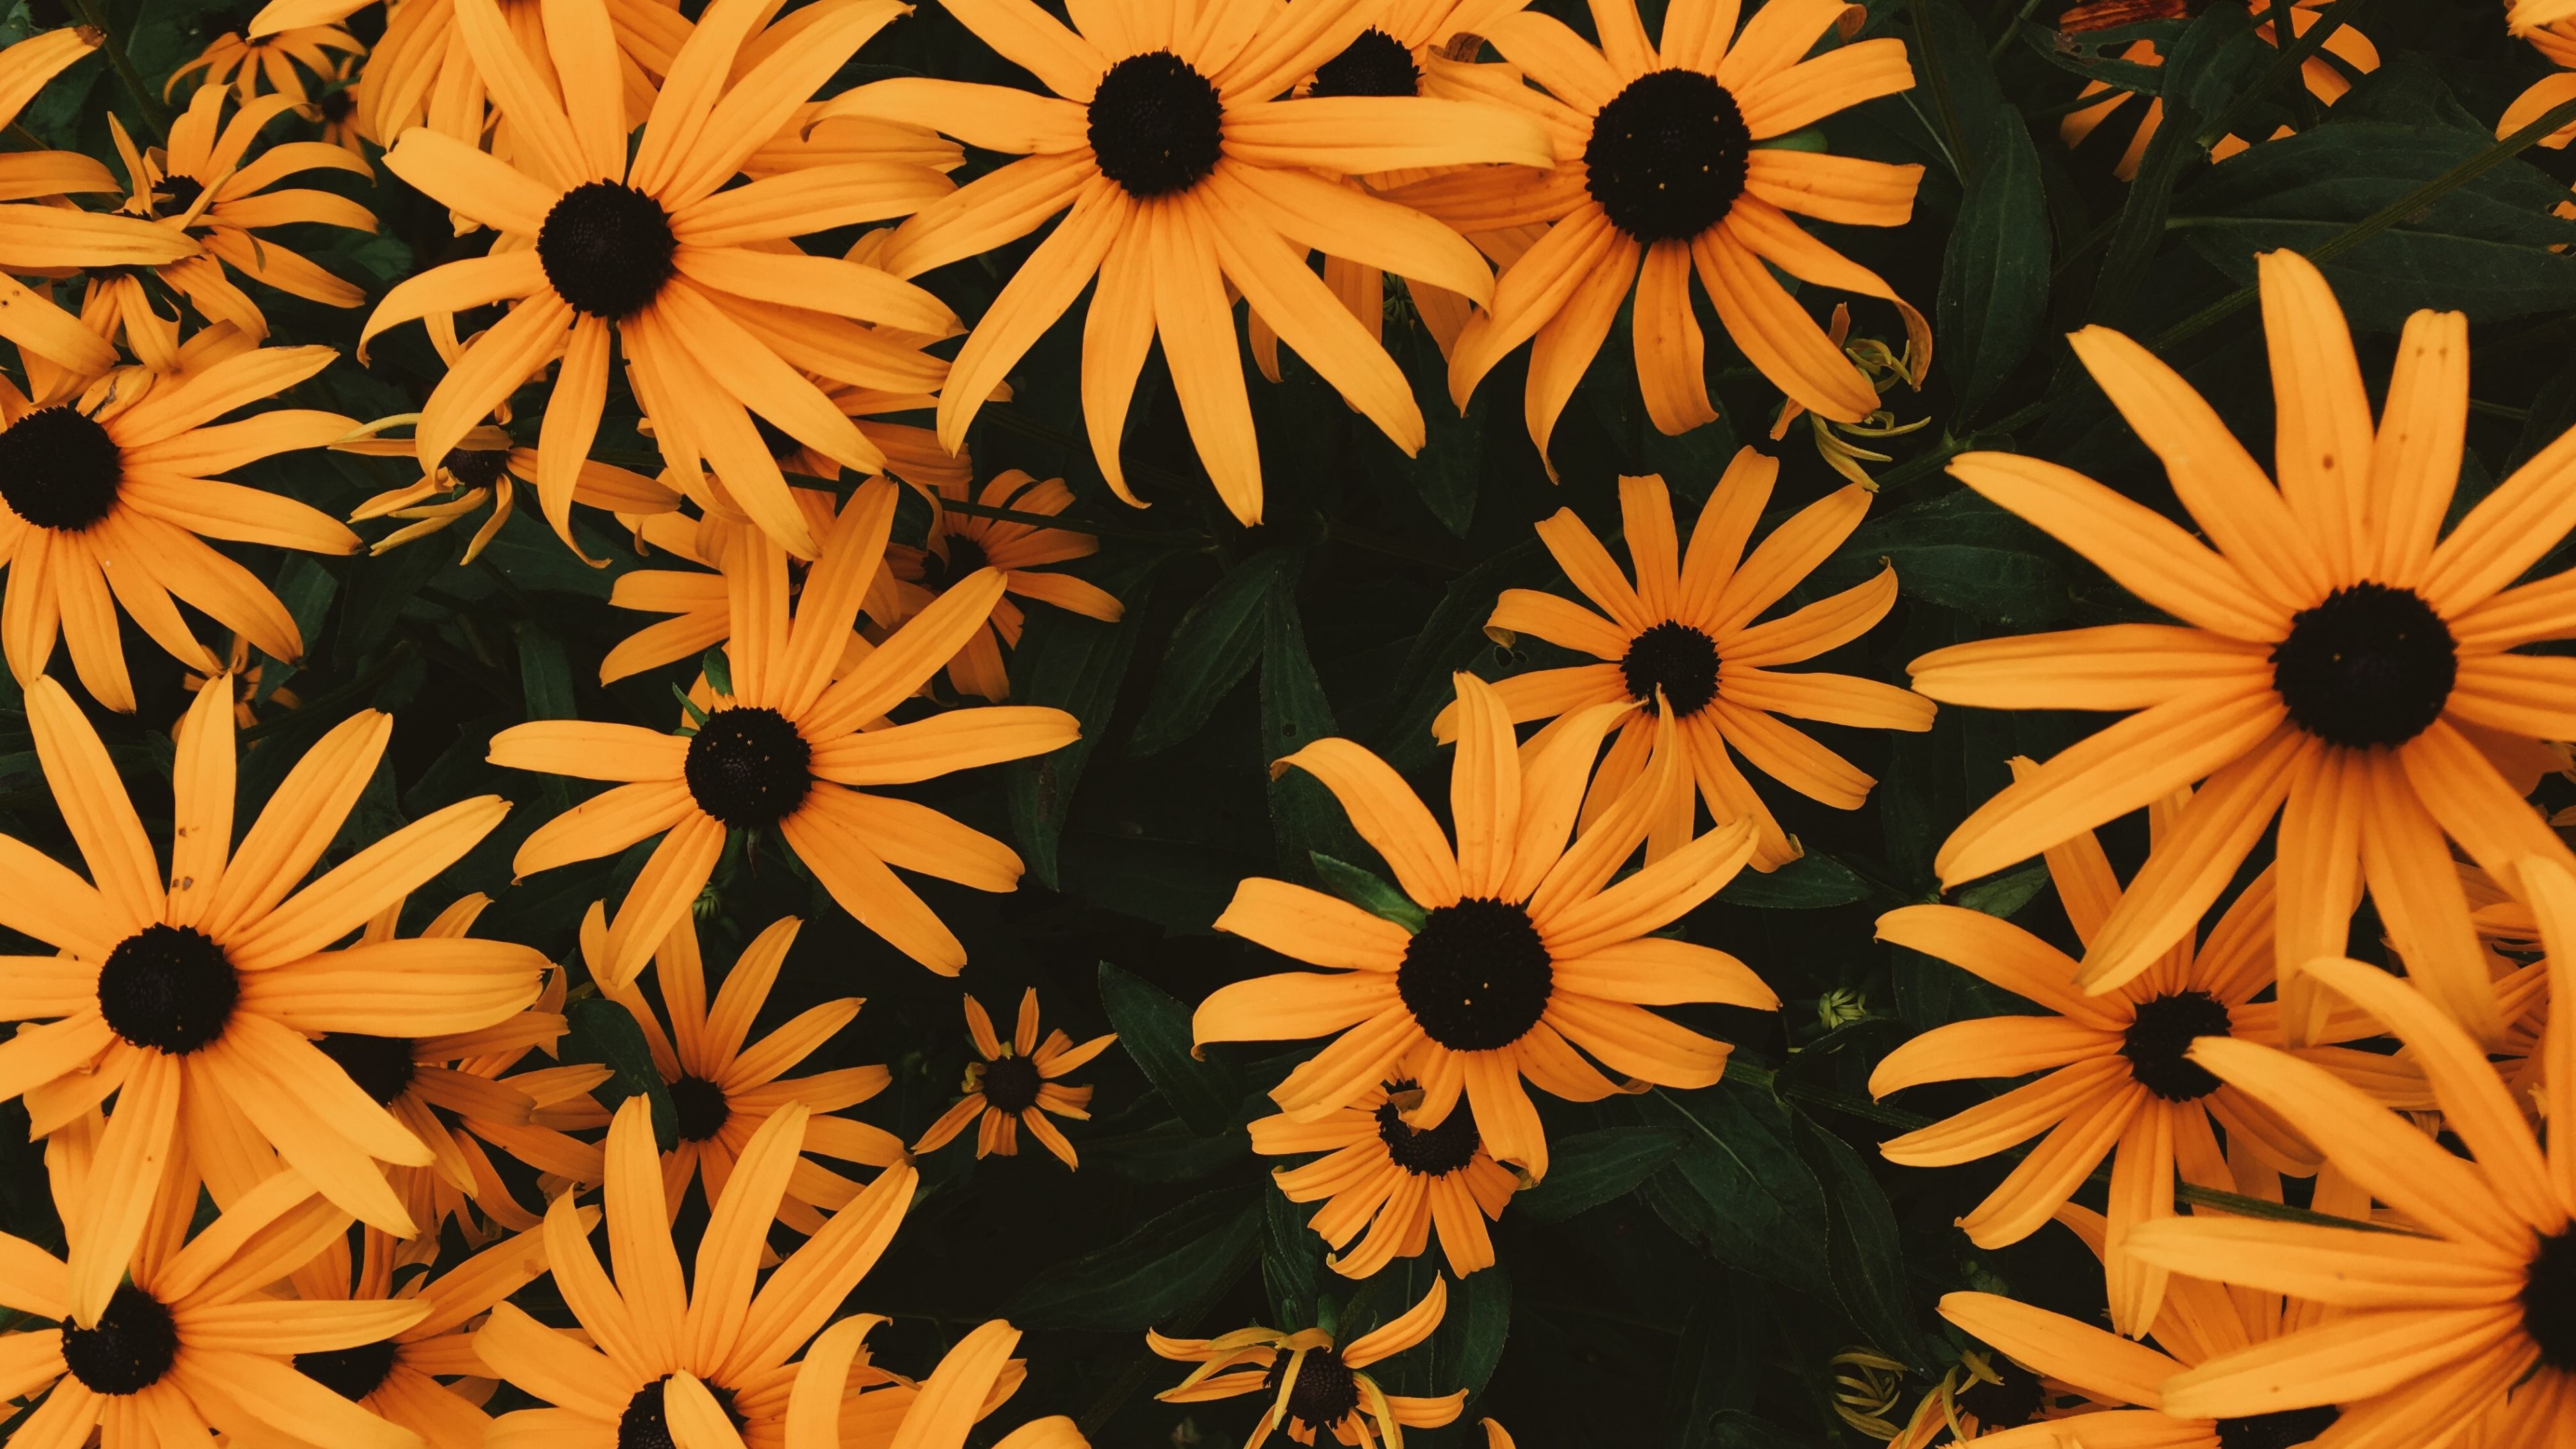 Wallpaper Coneflowers Flowers Flowerbed Many Aesthetic Wallpapers For Chromebook 488550 Hd Wallpaper Backgrounds Download 3840x2160 wallpaper coneflowers flowers flowerbed many flowers. aesthetic wallpapers for chromebook